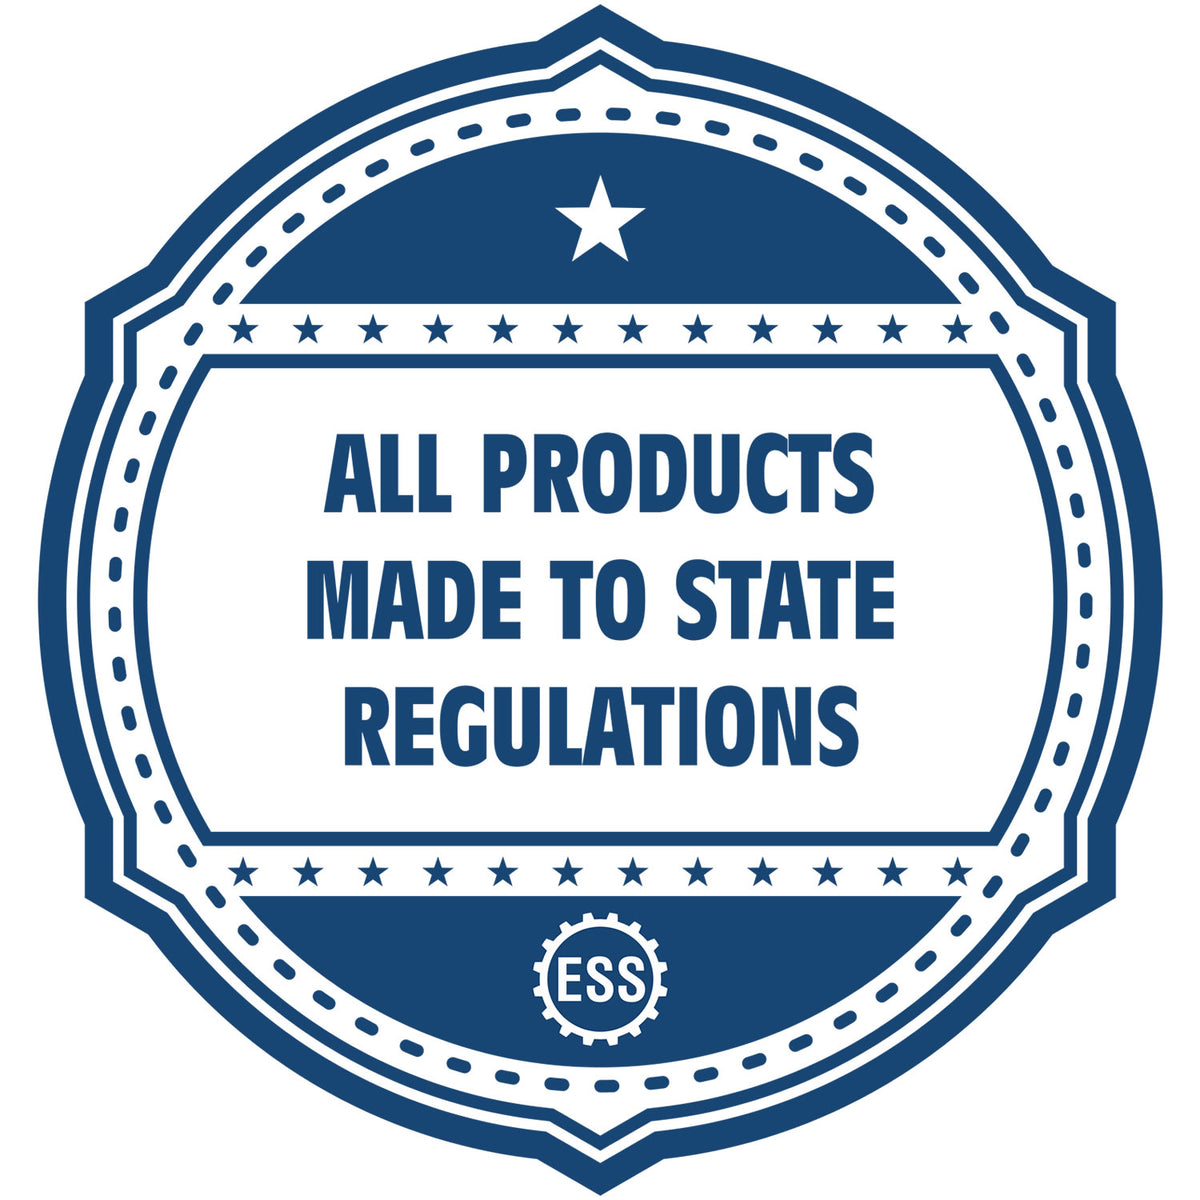 An icon or badge element for the Maine Desk Surveyor Seal Embosser showing that this product is made in compliance with state regulations.